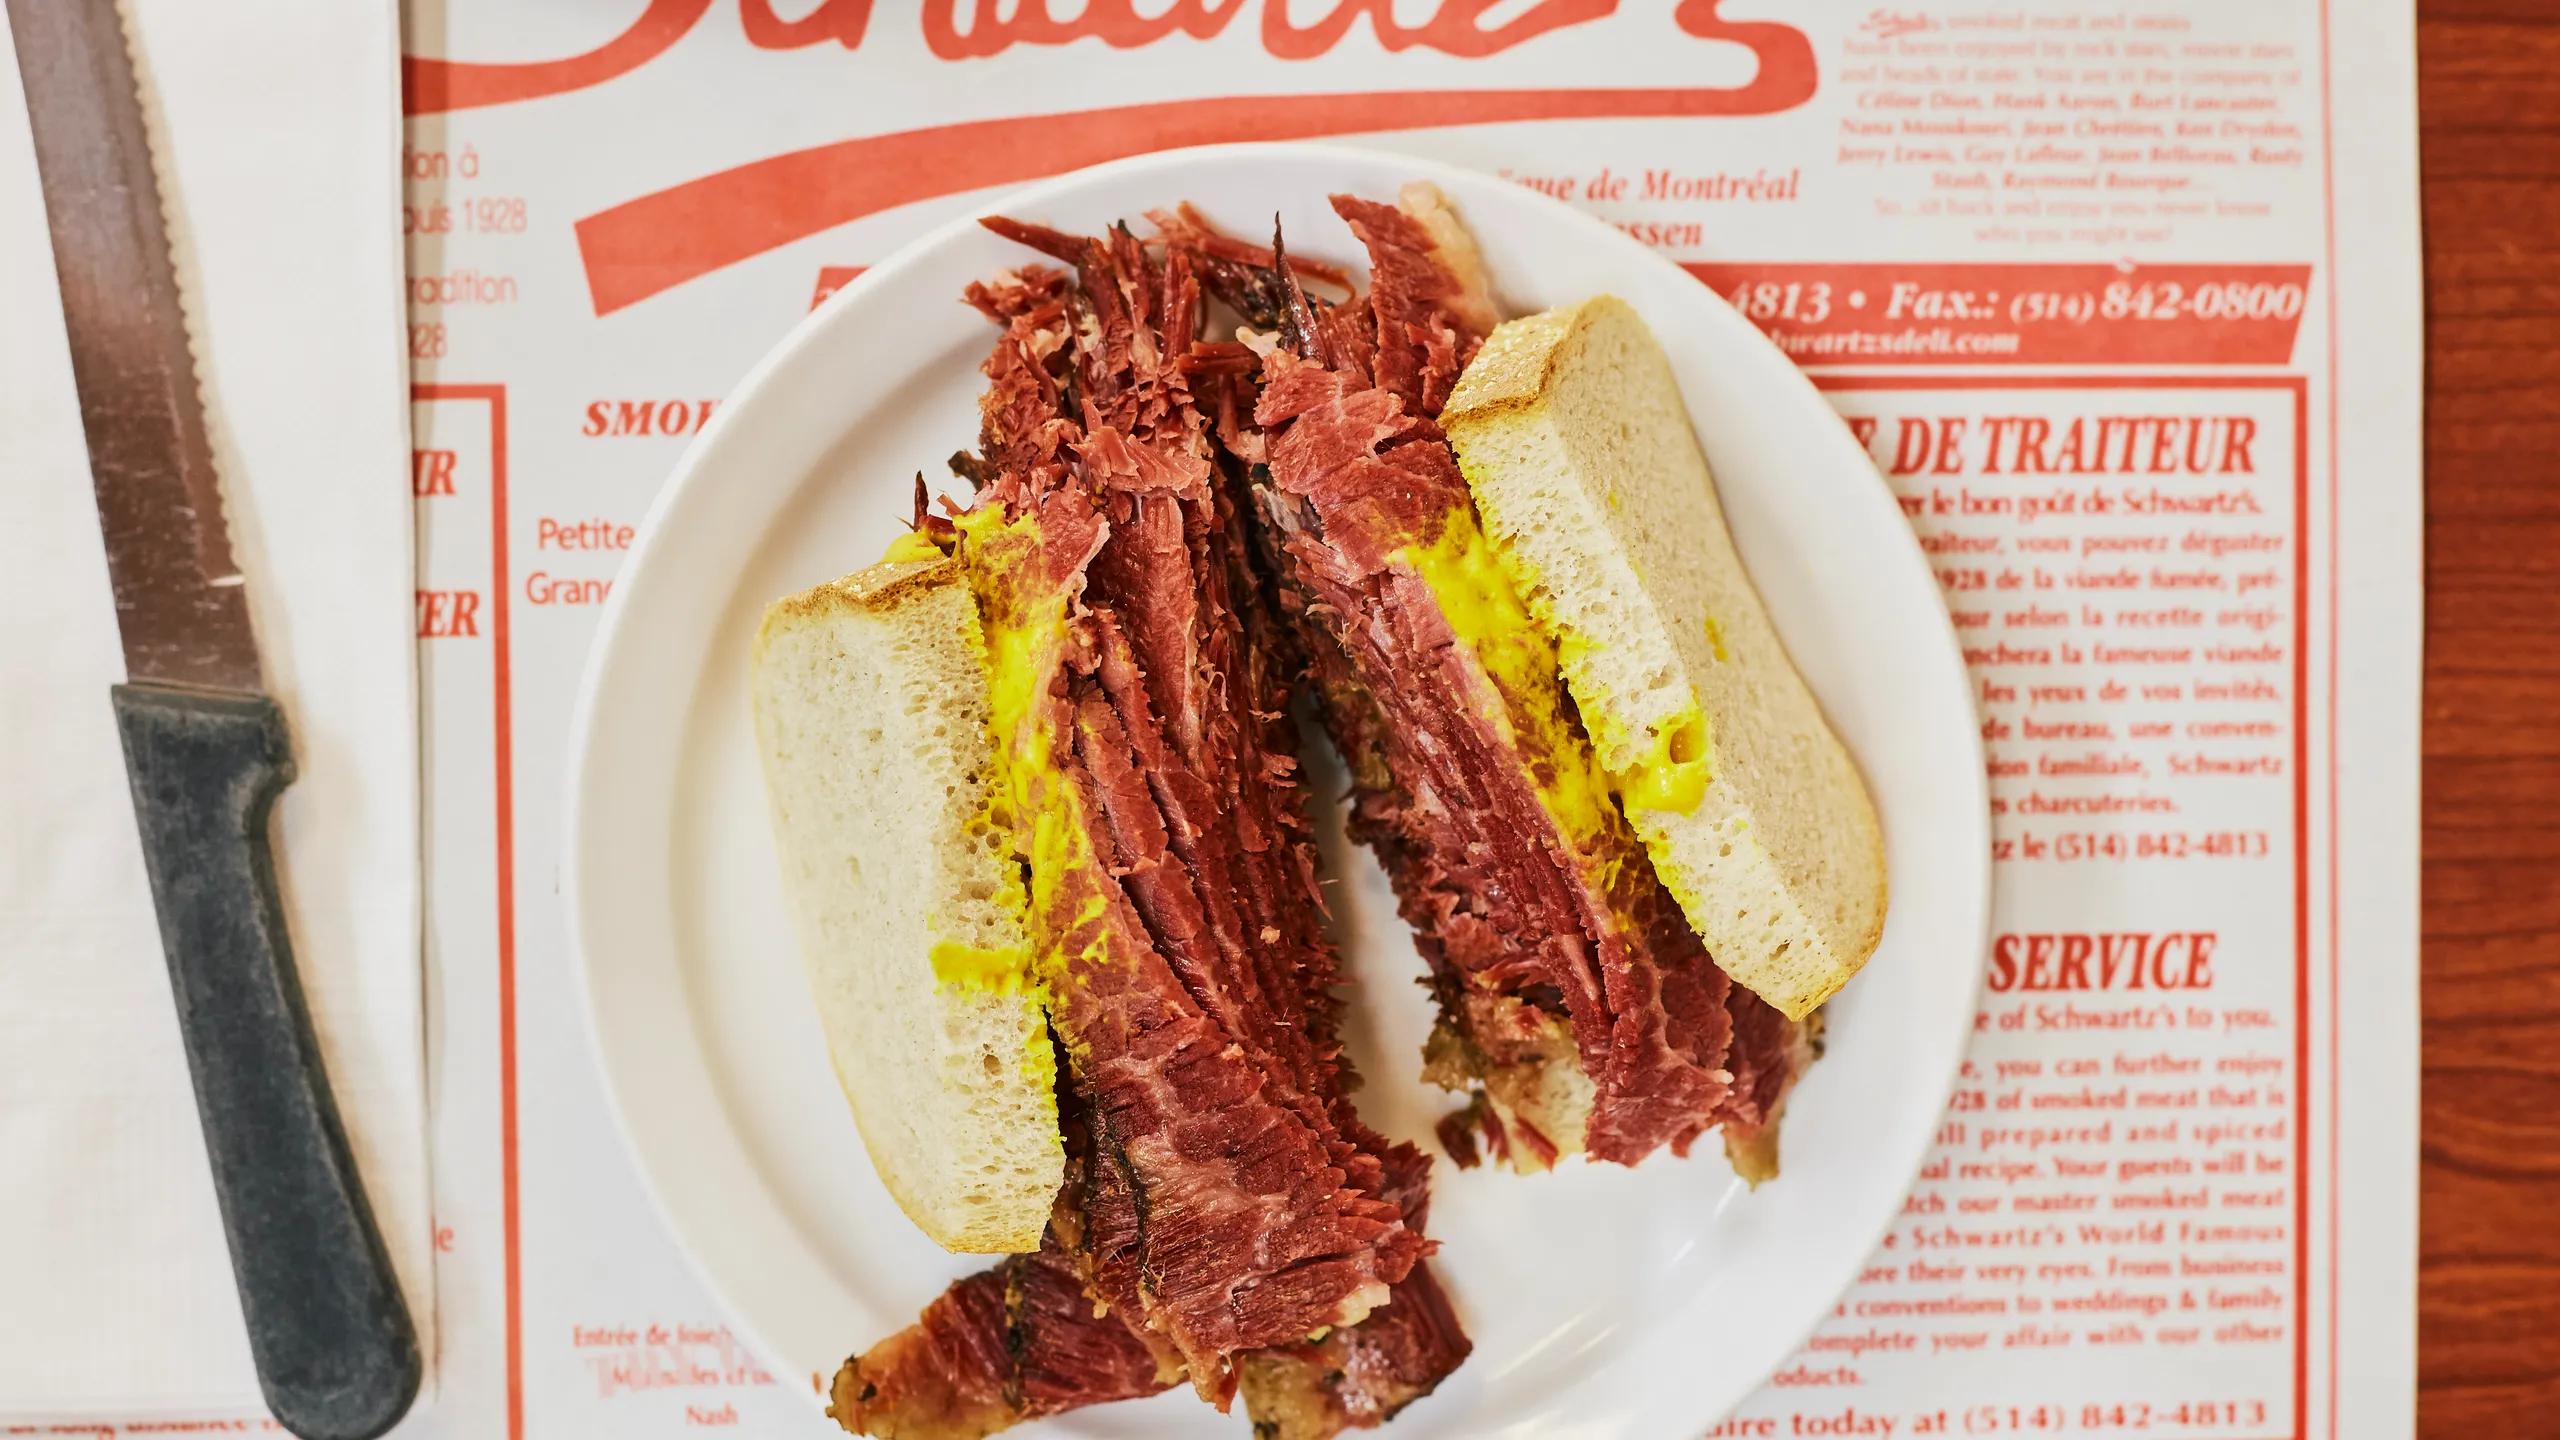 best smoked meat montreal - What is the Schwartz's deli famous for